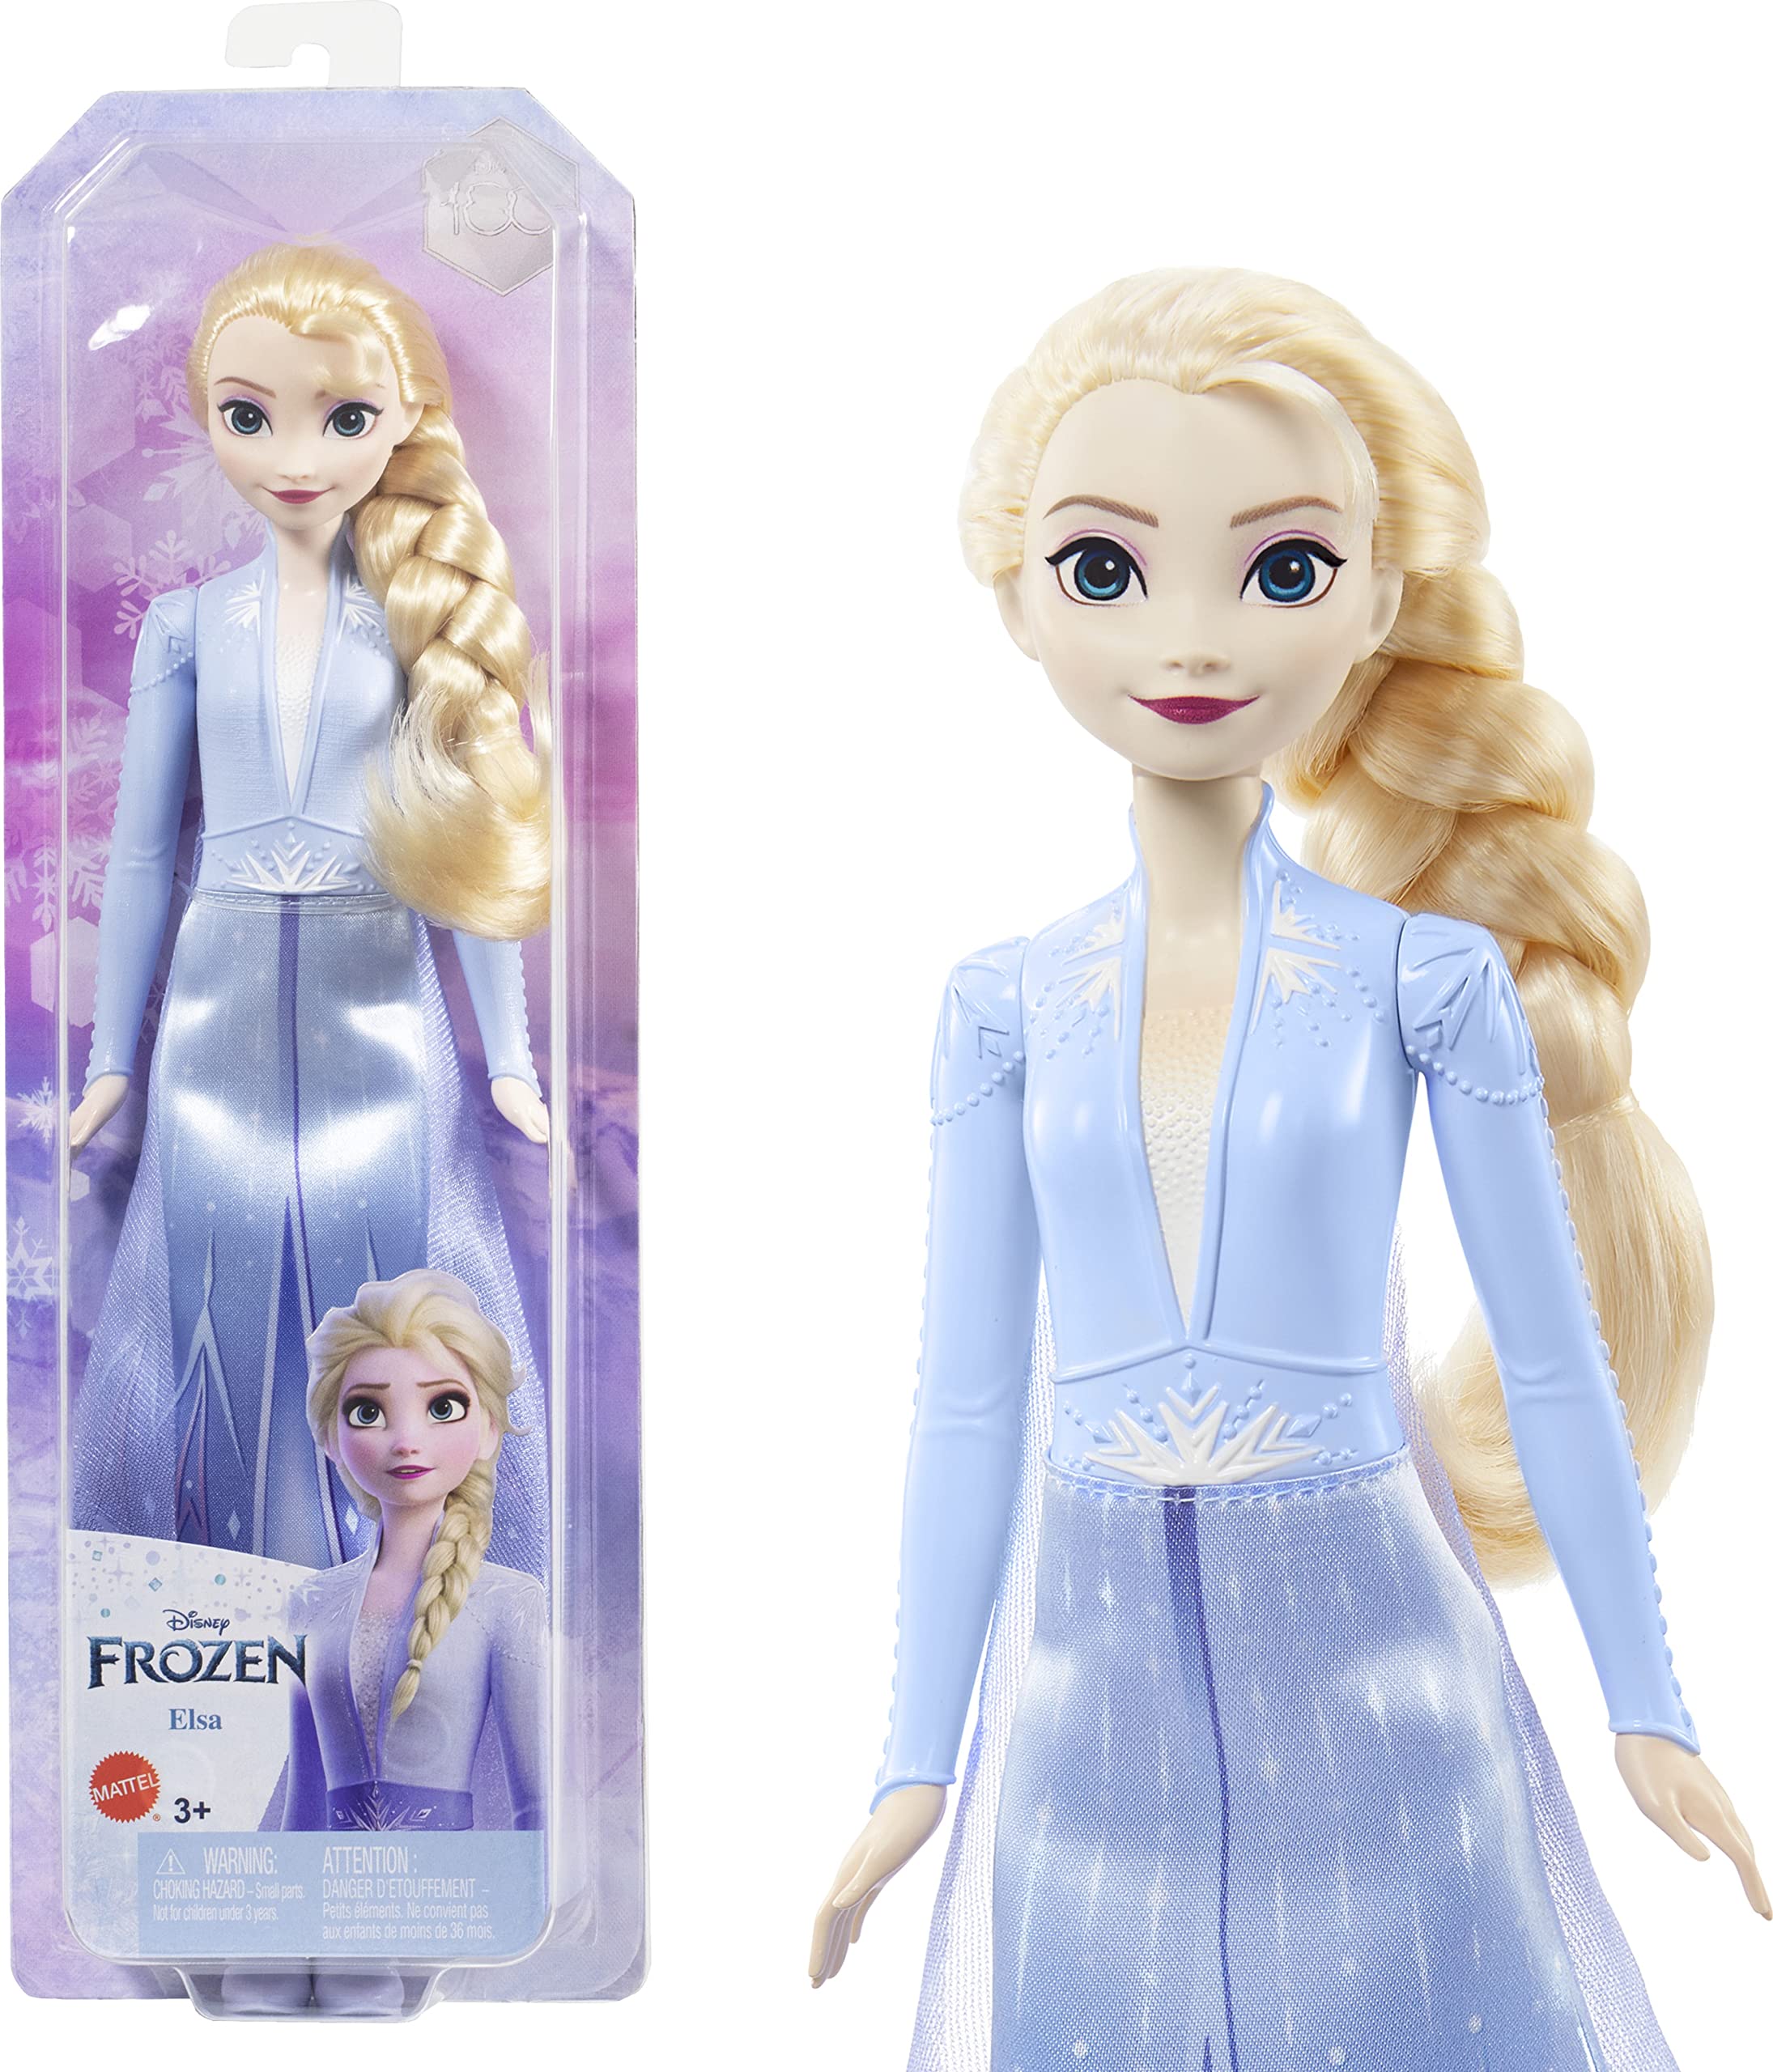 Disney Frozen by Mattel Elsa Fashion Doll & Accessory, Signature Look, Toy Inspired by the Movie Disney Frozen by Mattel 2